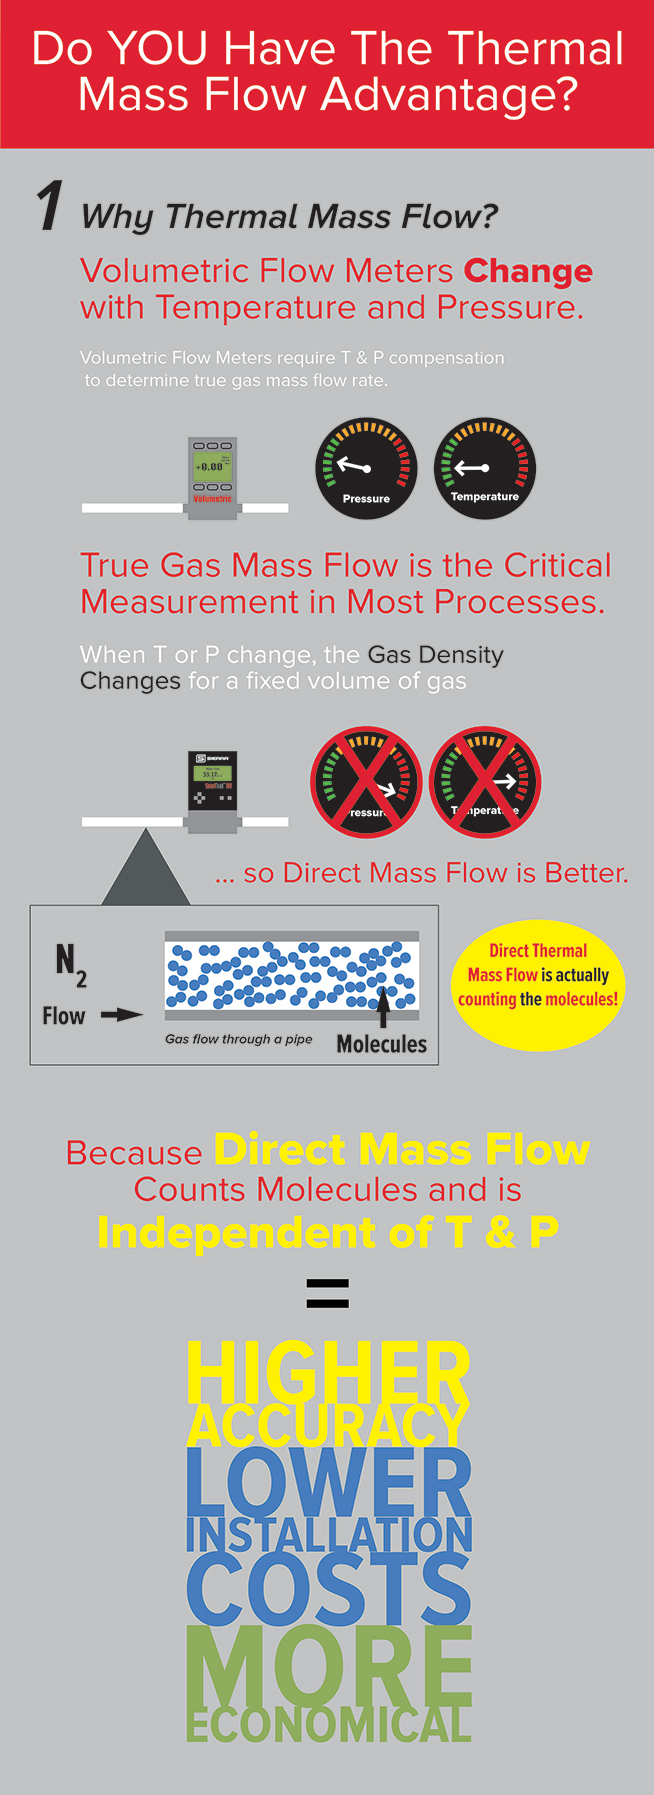 Do You Have the Thermal Mass Flow Advantage?